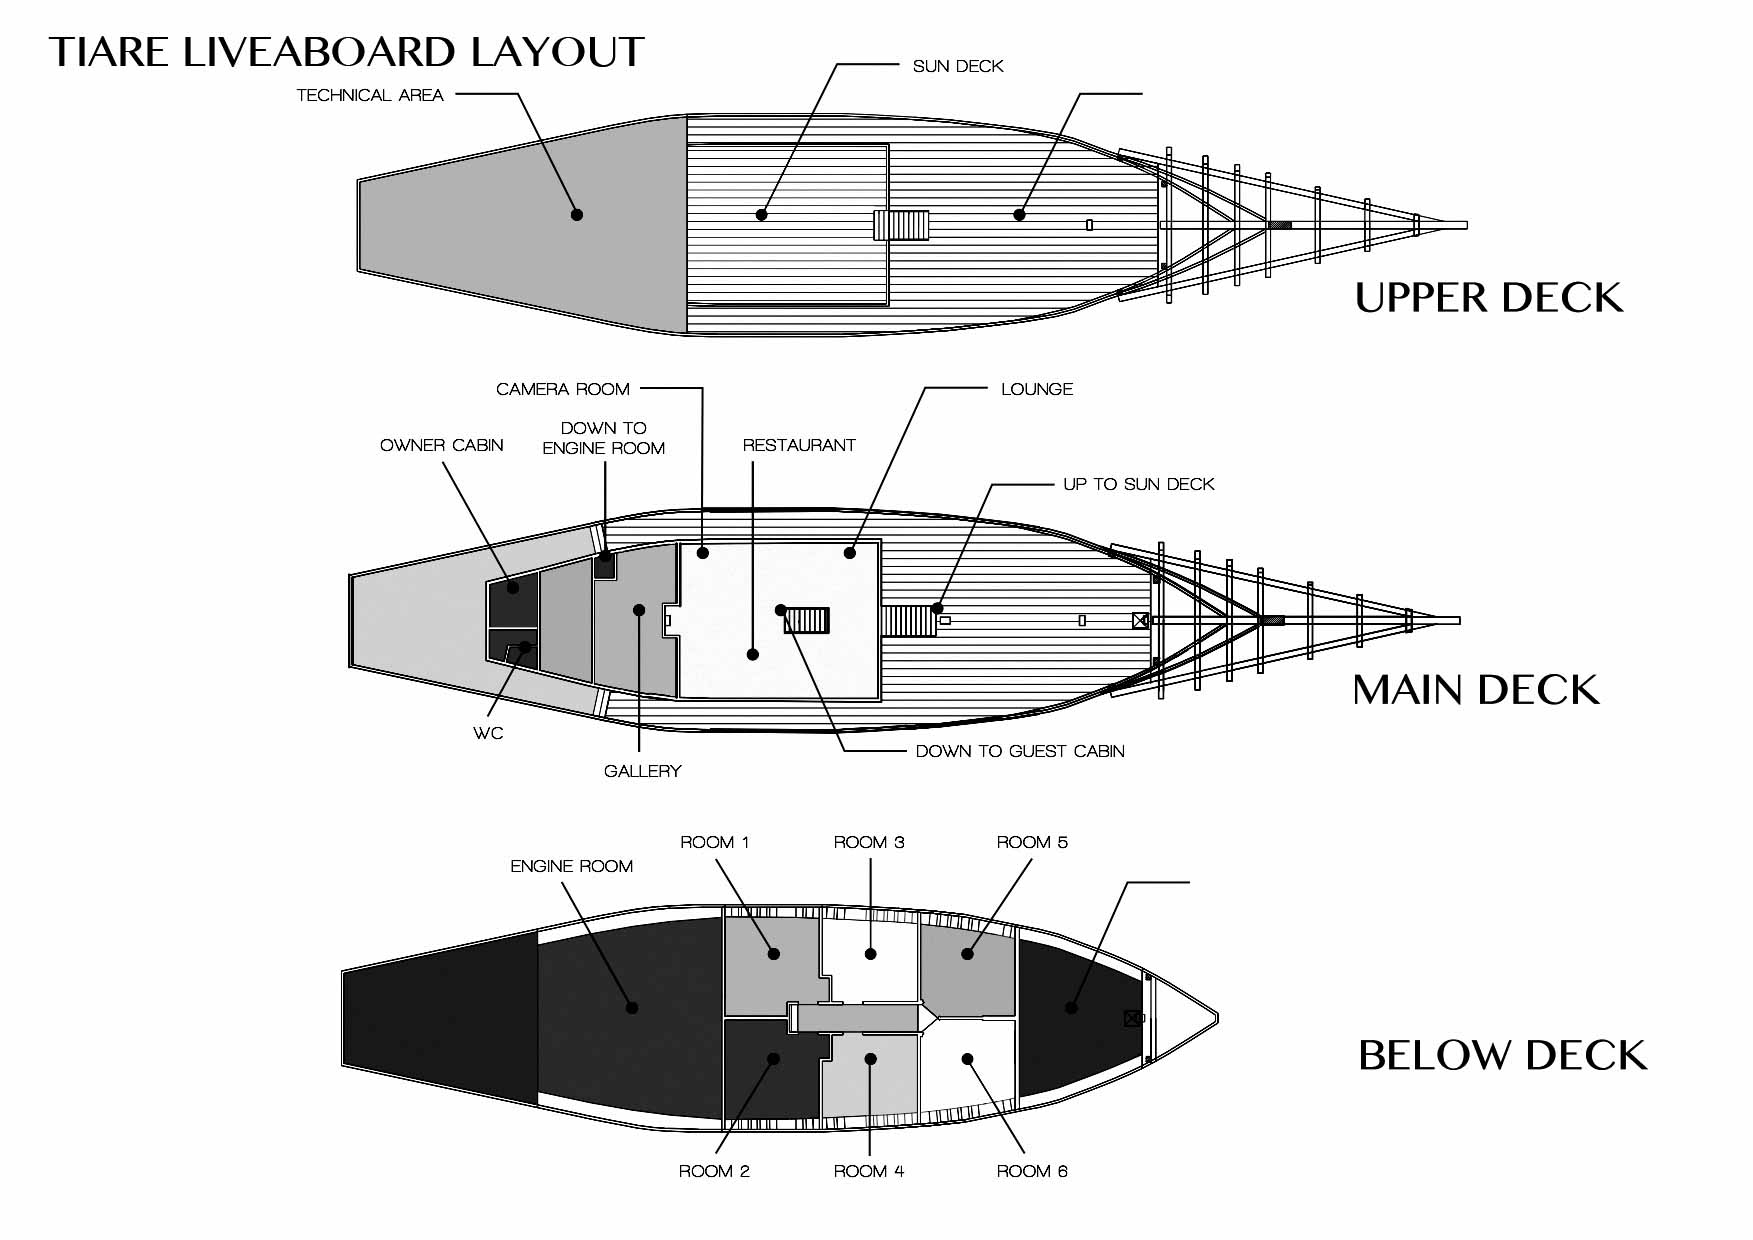 Layout of Tiare Cruise Liveaboard